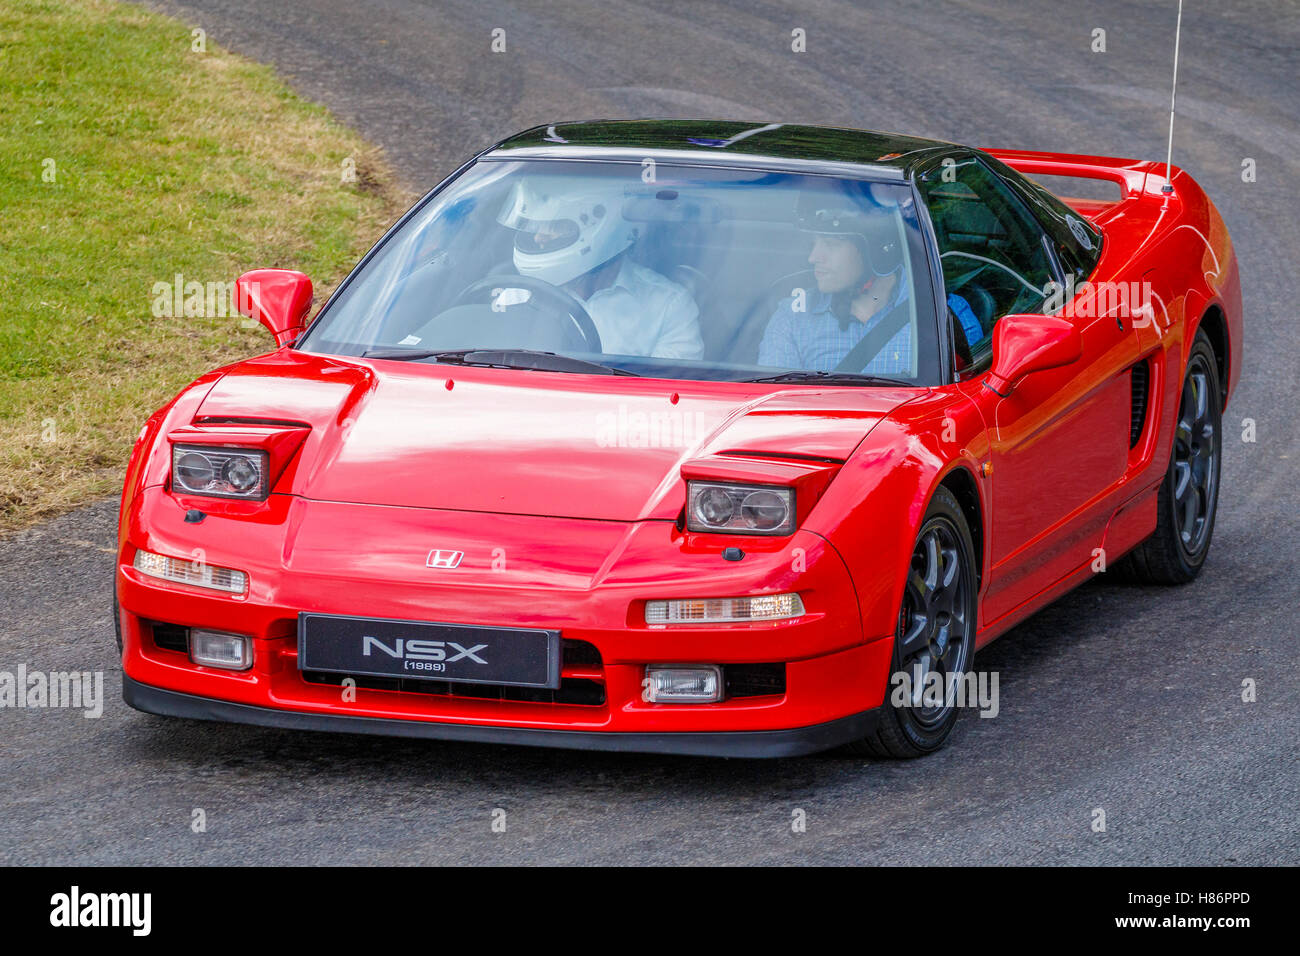 1989 Honda NSX sports car at the 2016 Goodwood Festival of Speed, Sussex, UK Stock Photo